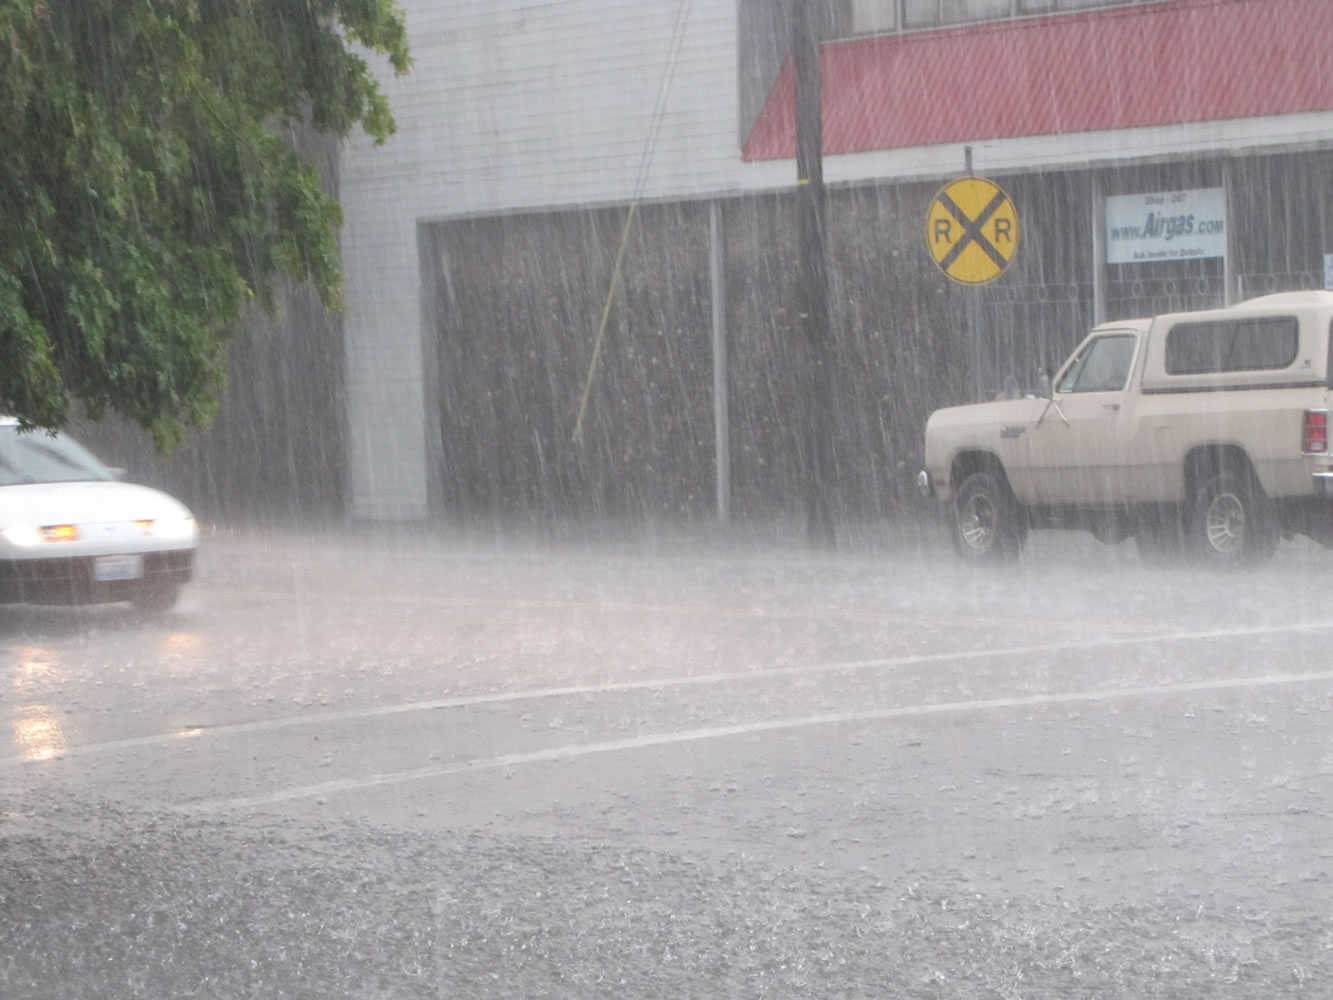 Heavy rain douses cars on West Eighth Street in downtown Vancouver during Saturday's thunderstorm.